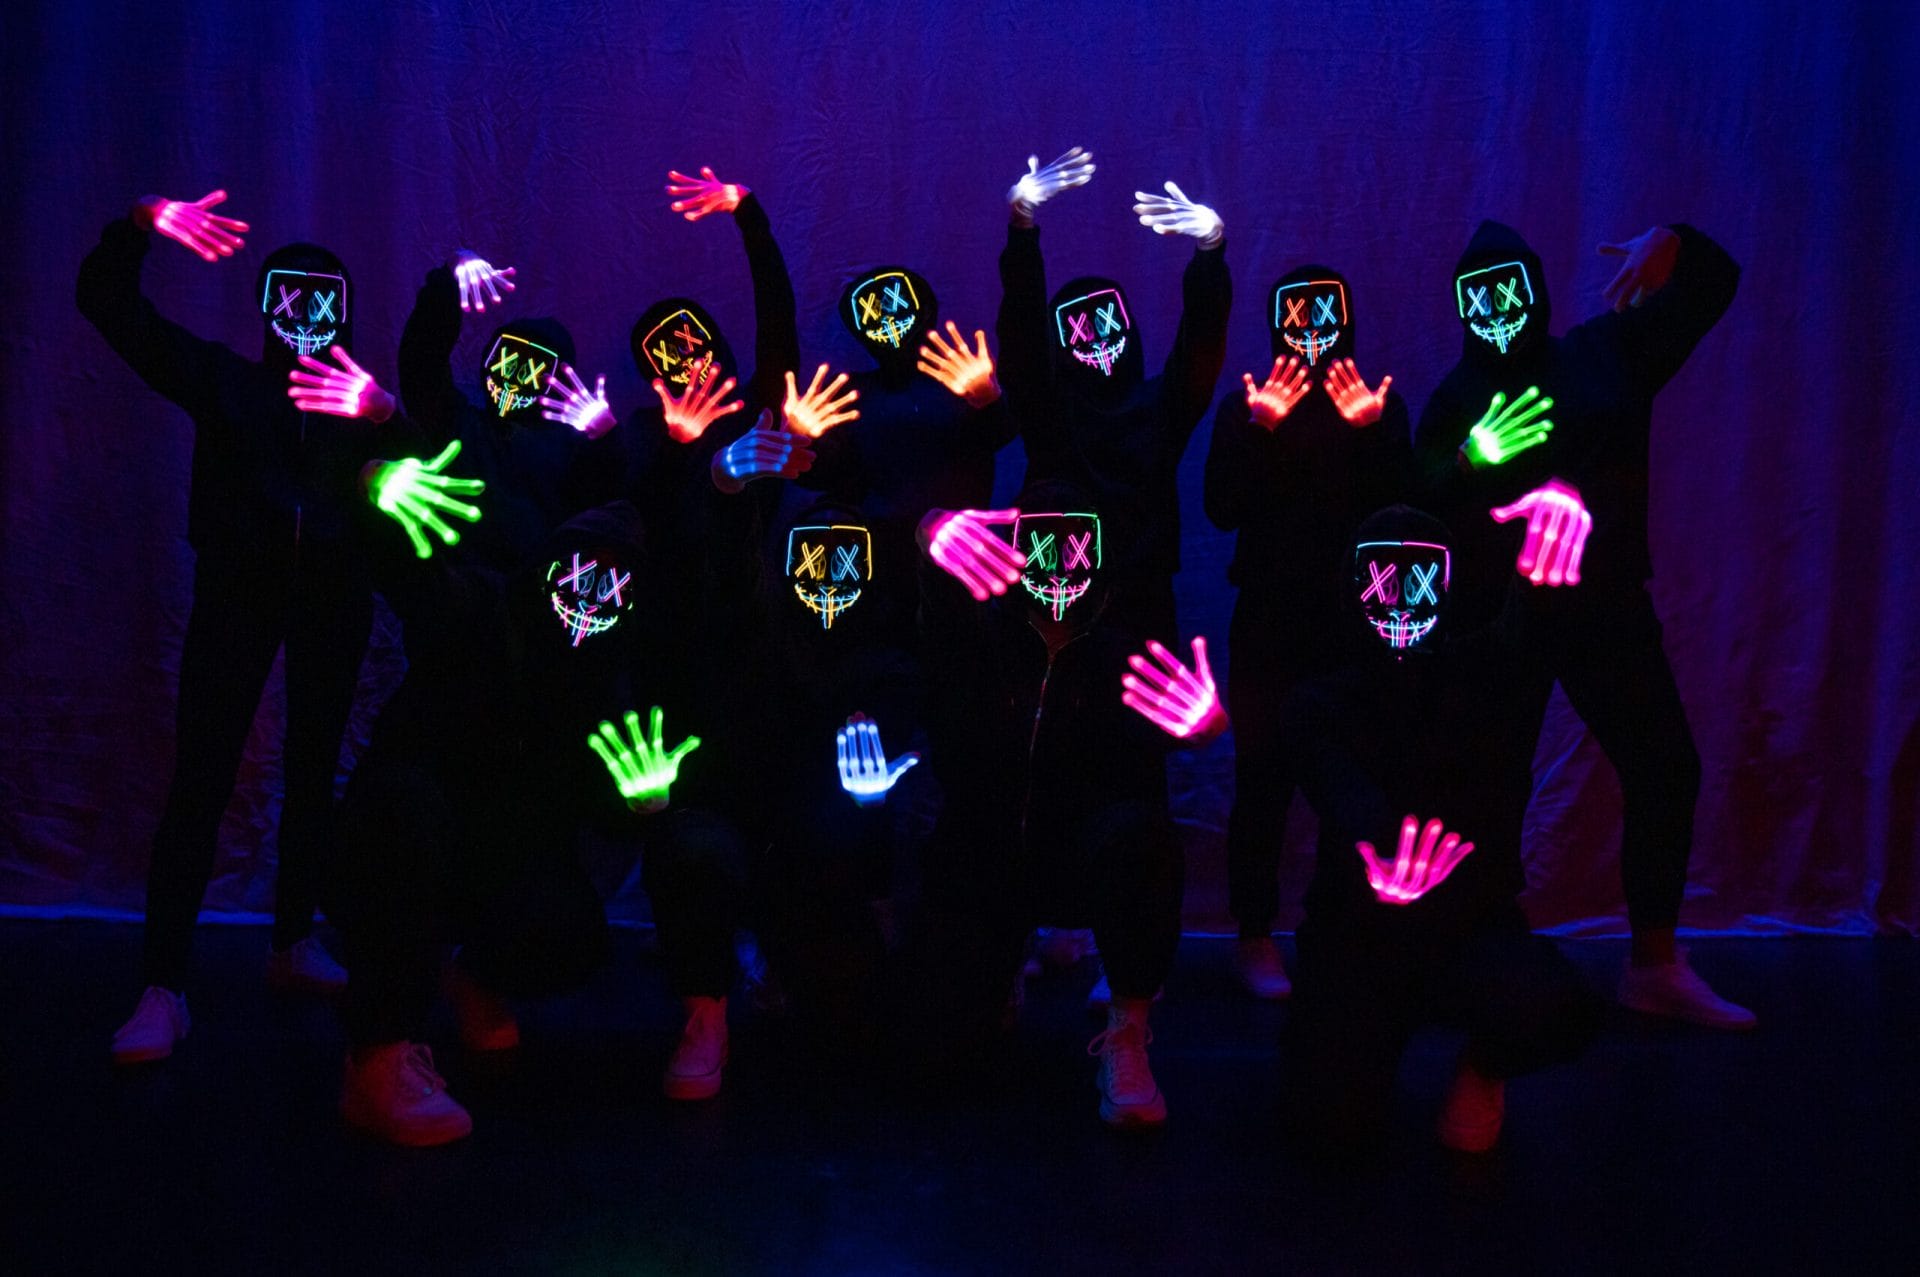 Dancers posing on a dark stage in glow-in the dark masks and gloves